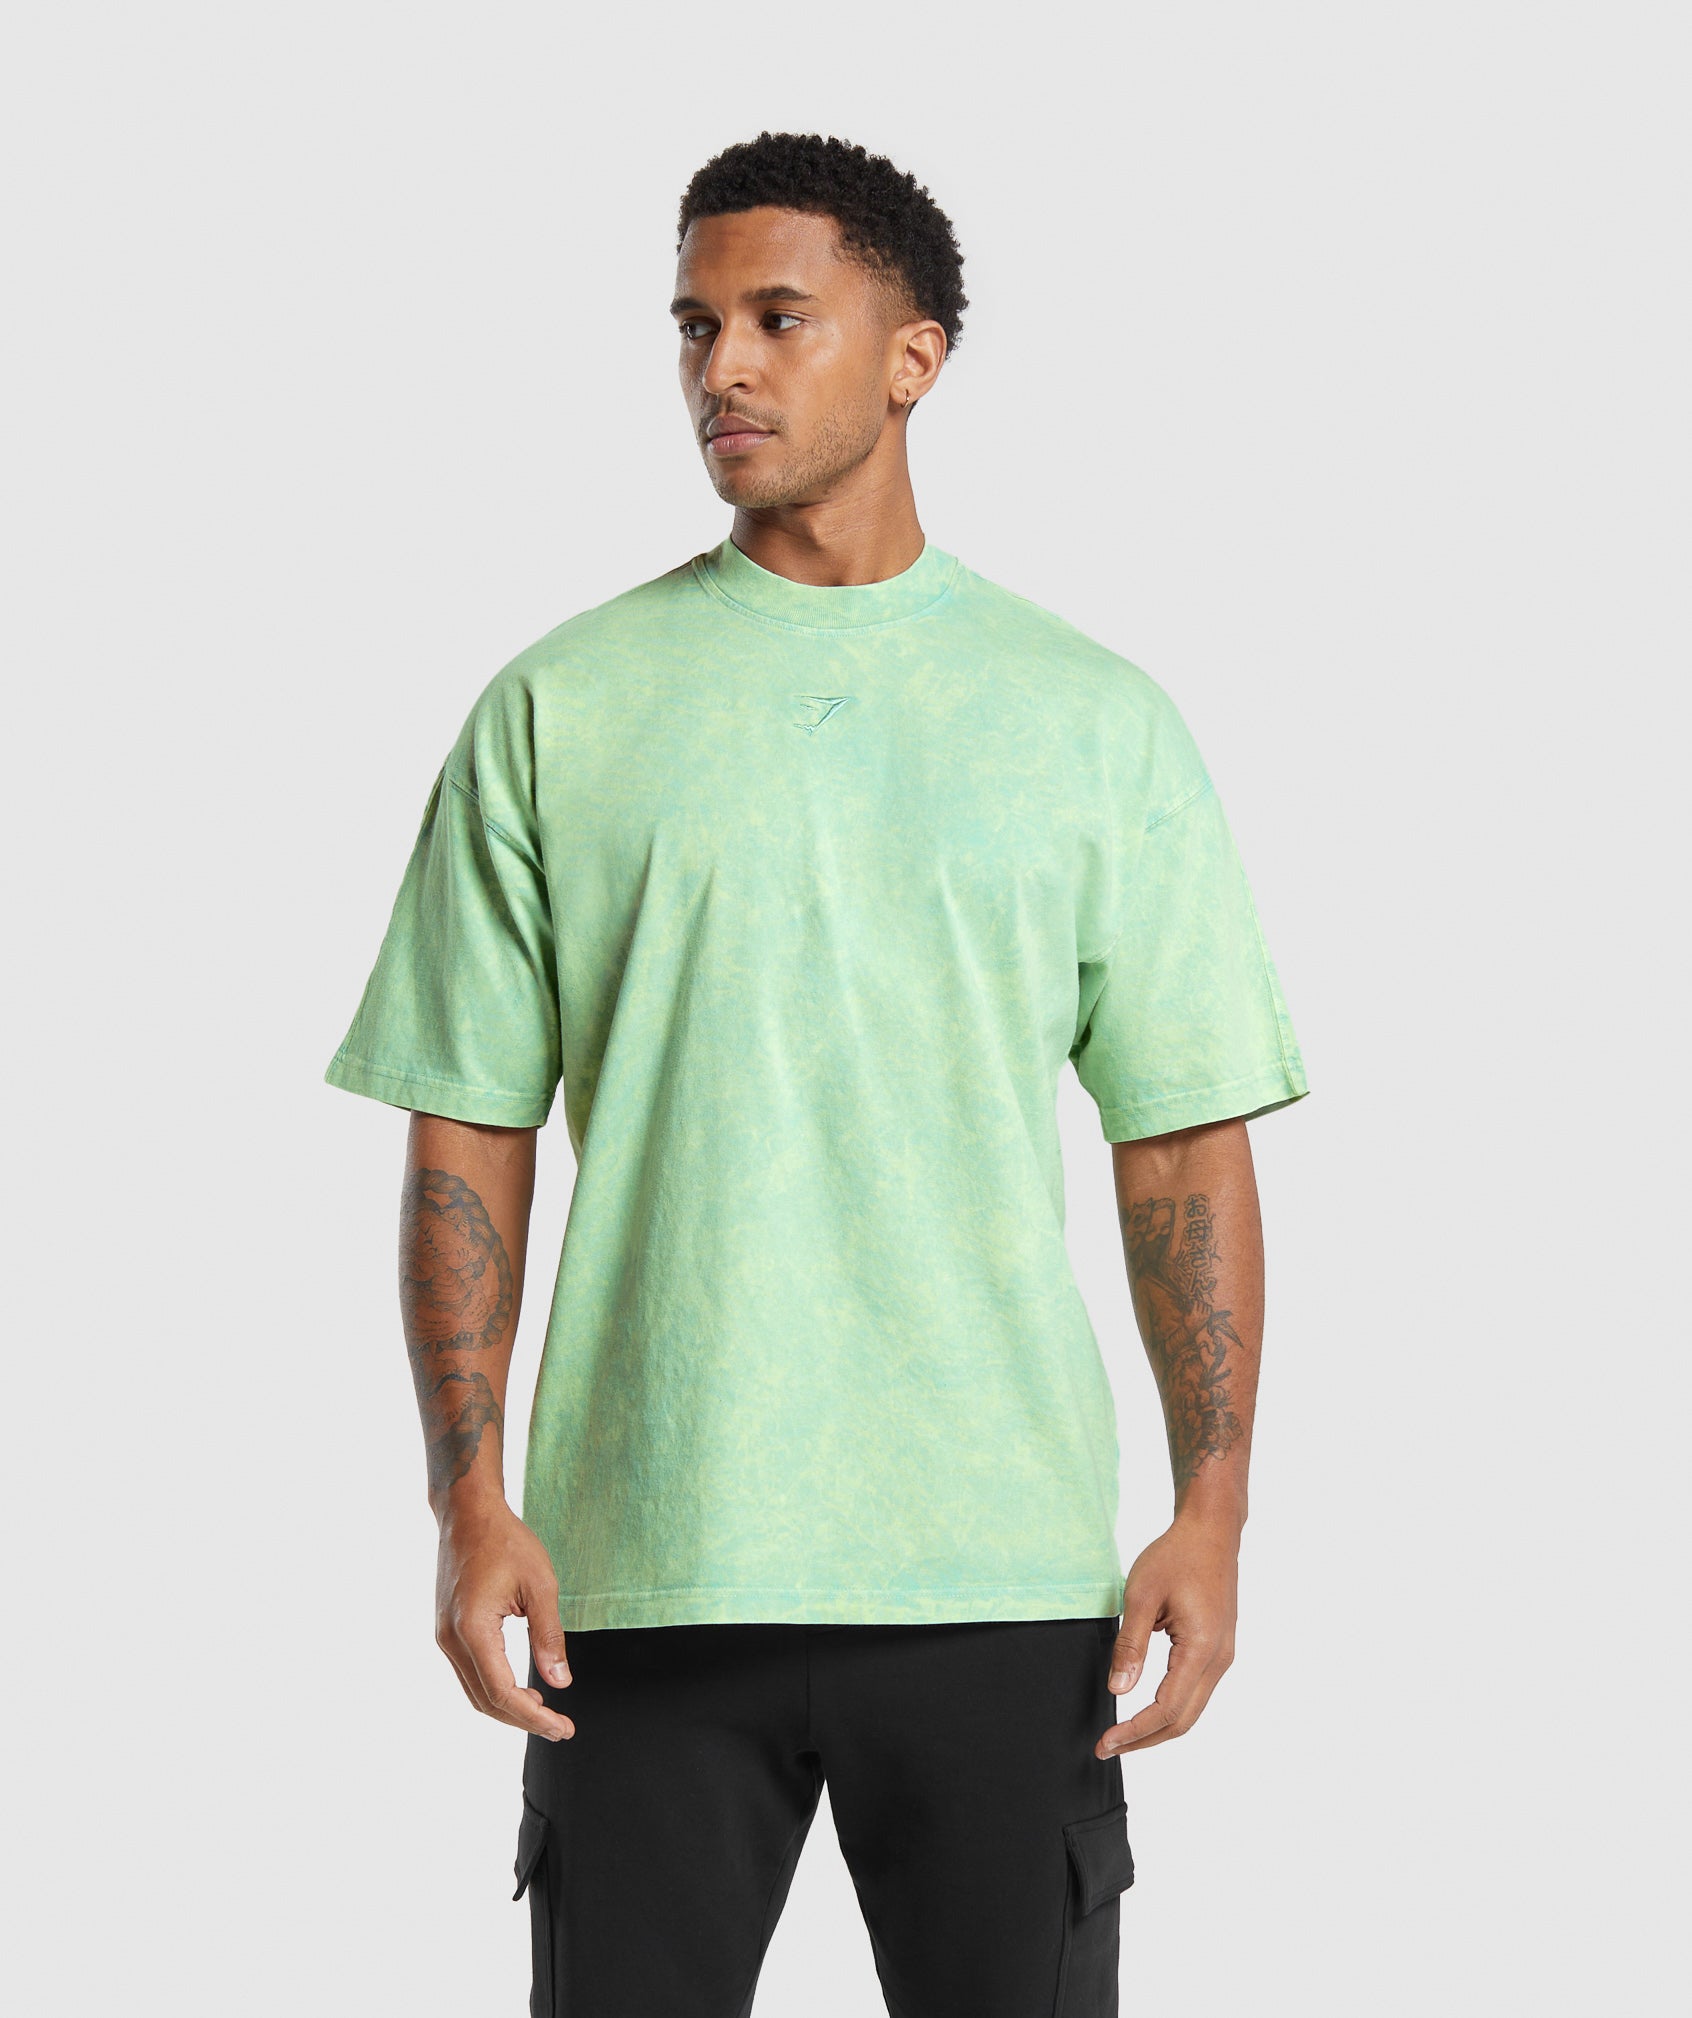 Rest Day Washed T-Shirt in Lido Green